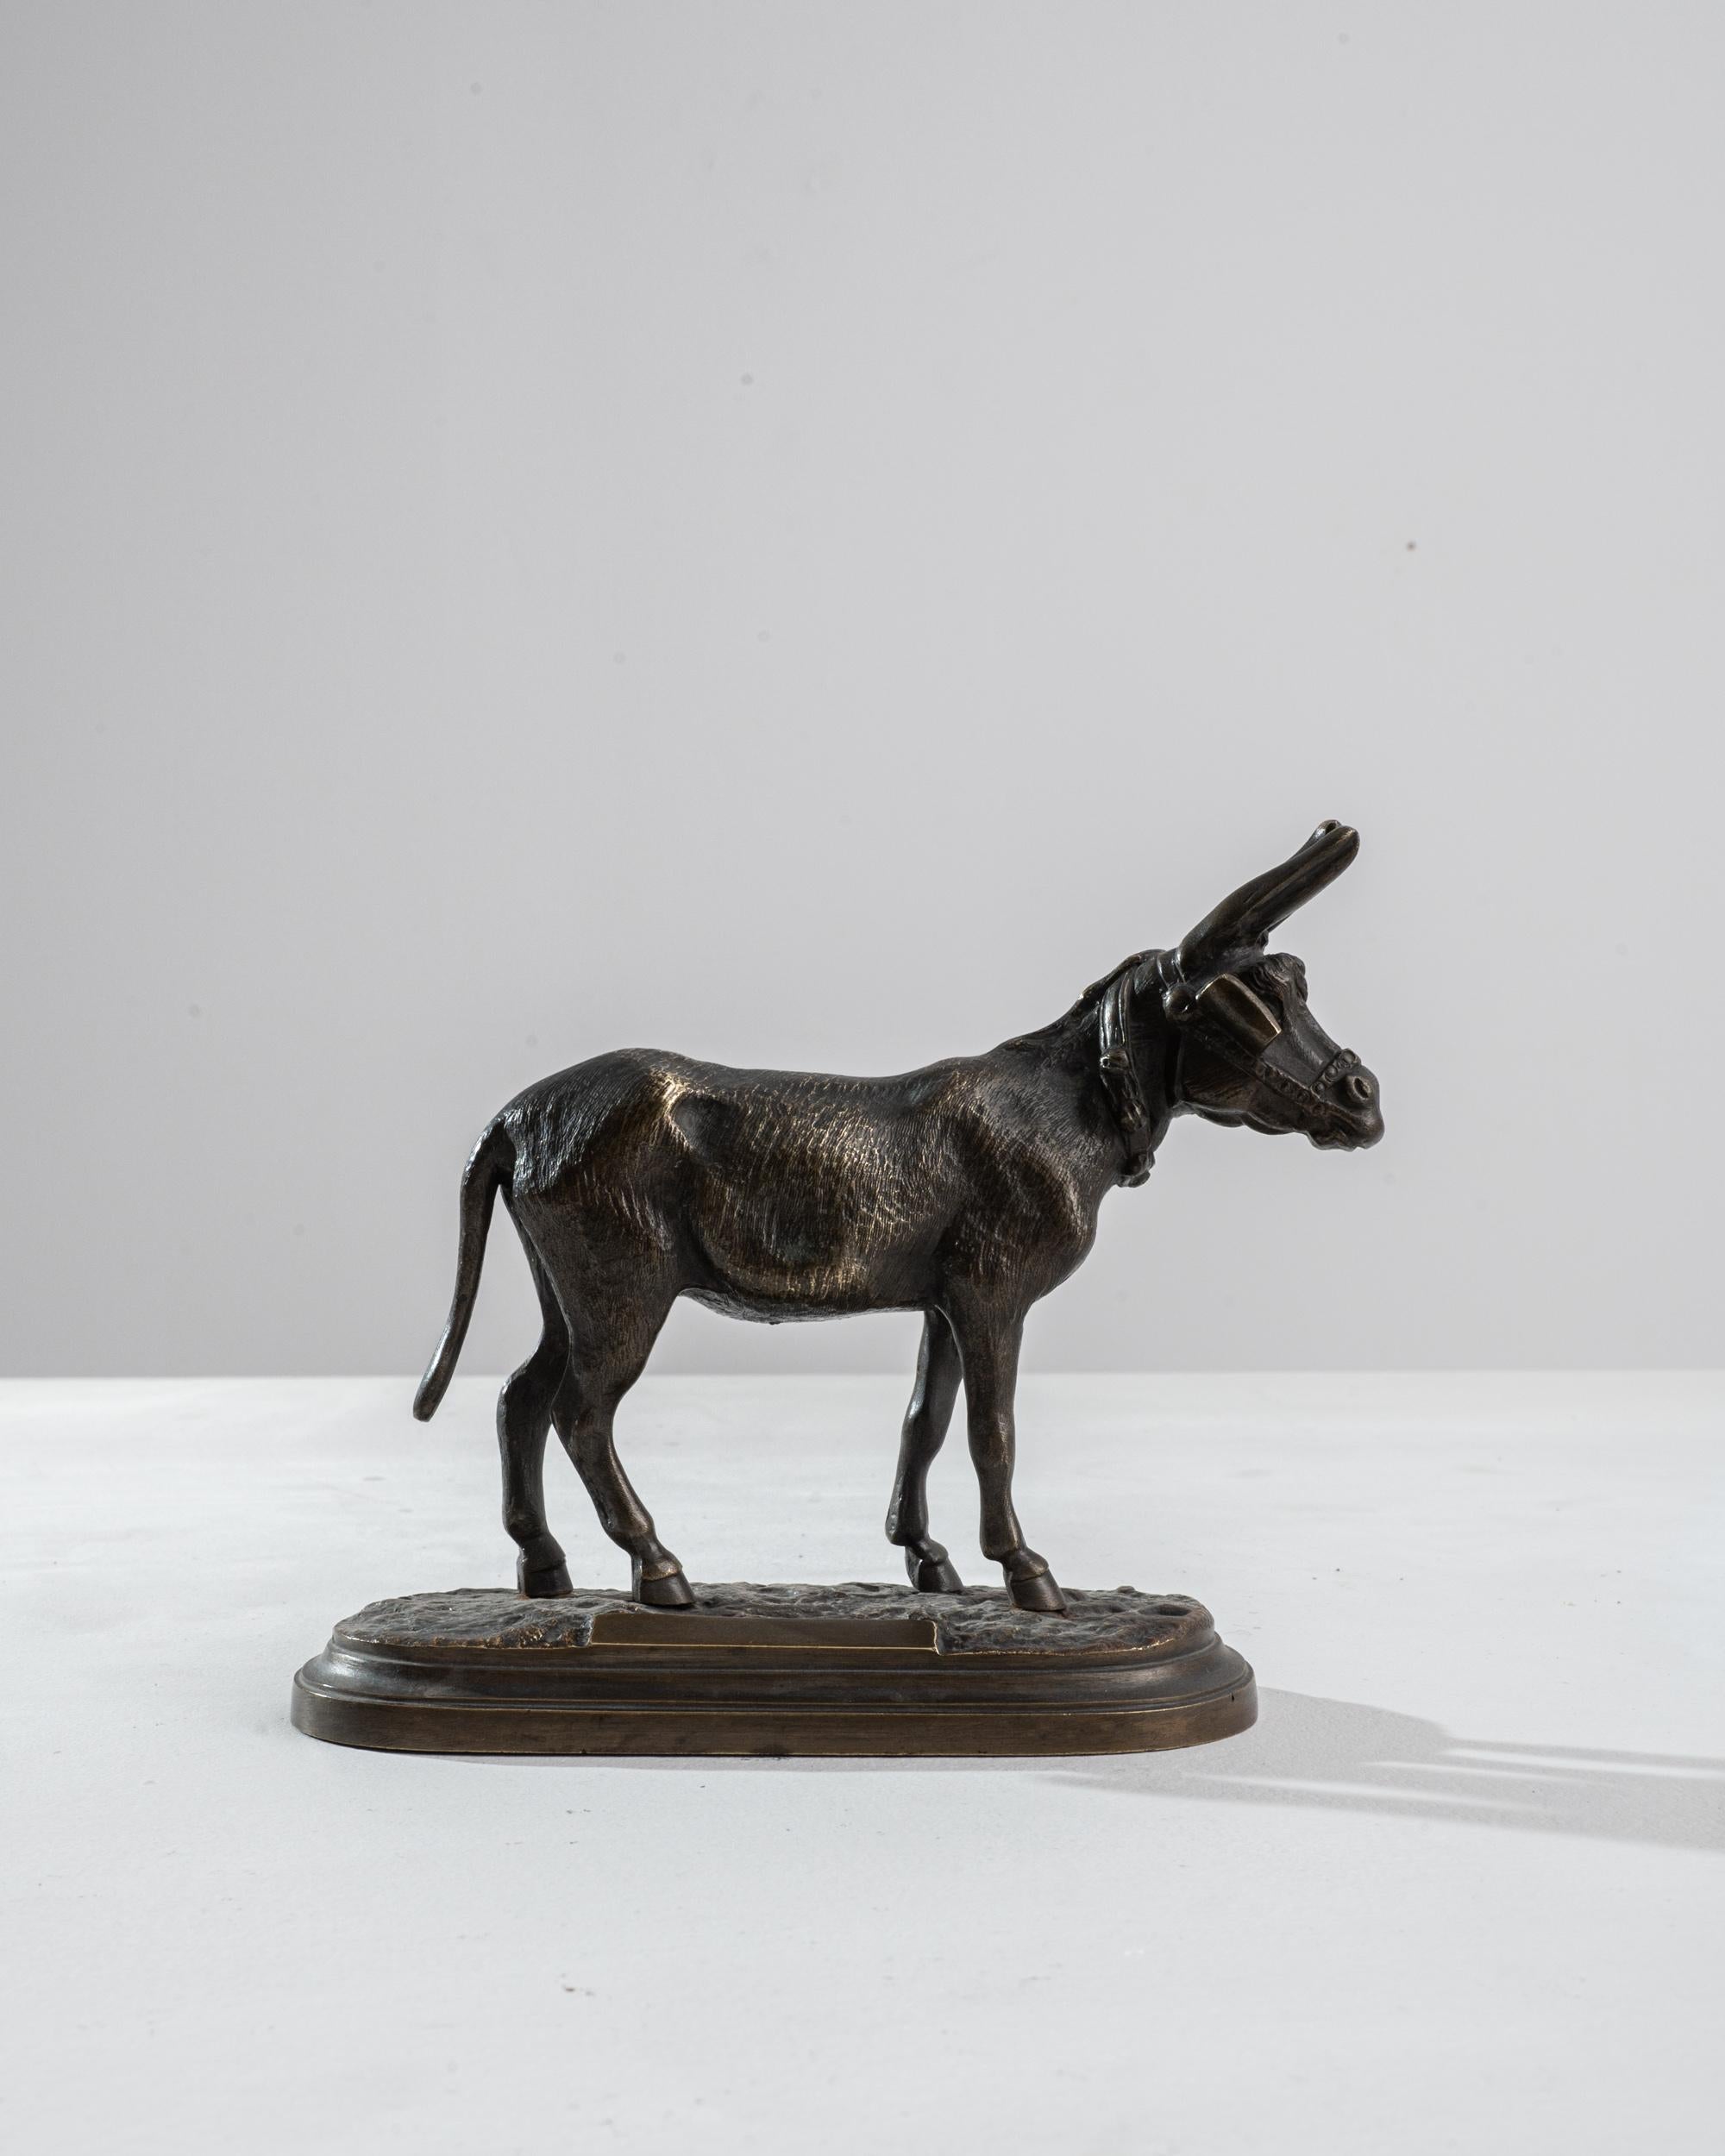 A 1900s French metal miniature statue. This small statue was first created in clay or wax and then completed by pouring bronze to create the final cast. Standing about five and a half inches, this neatly composed sculpture of a donkey conveys an